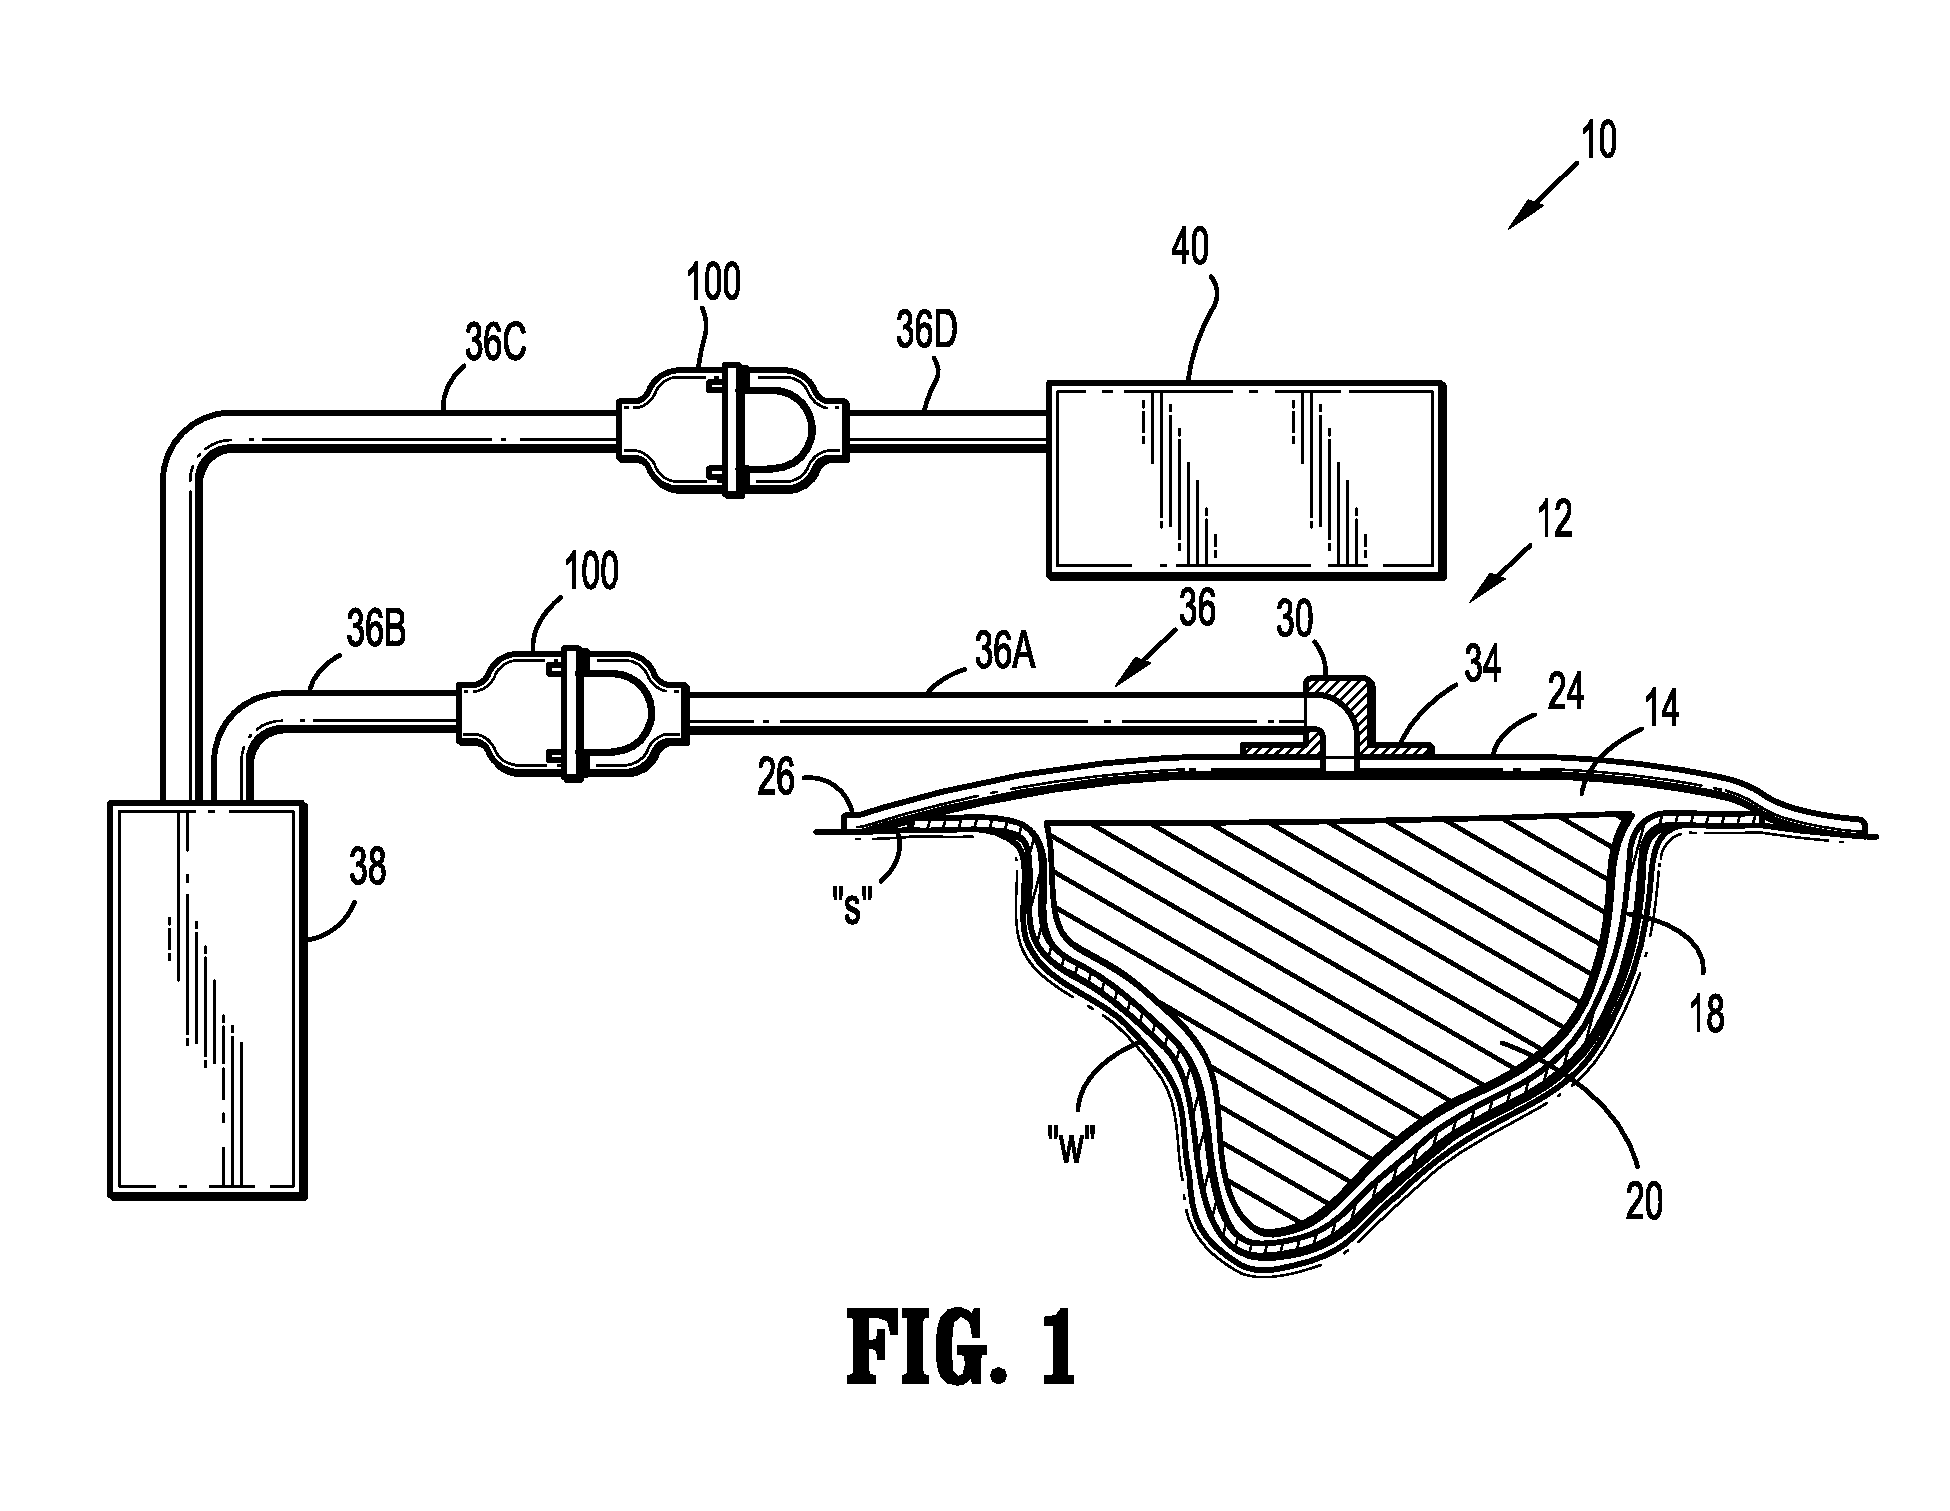 System for Providing Continual Drainage in Negative Pressure Wound Therapy